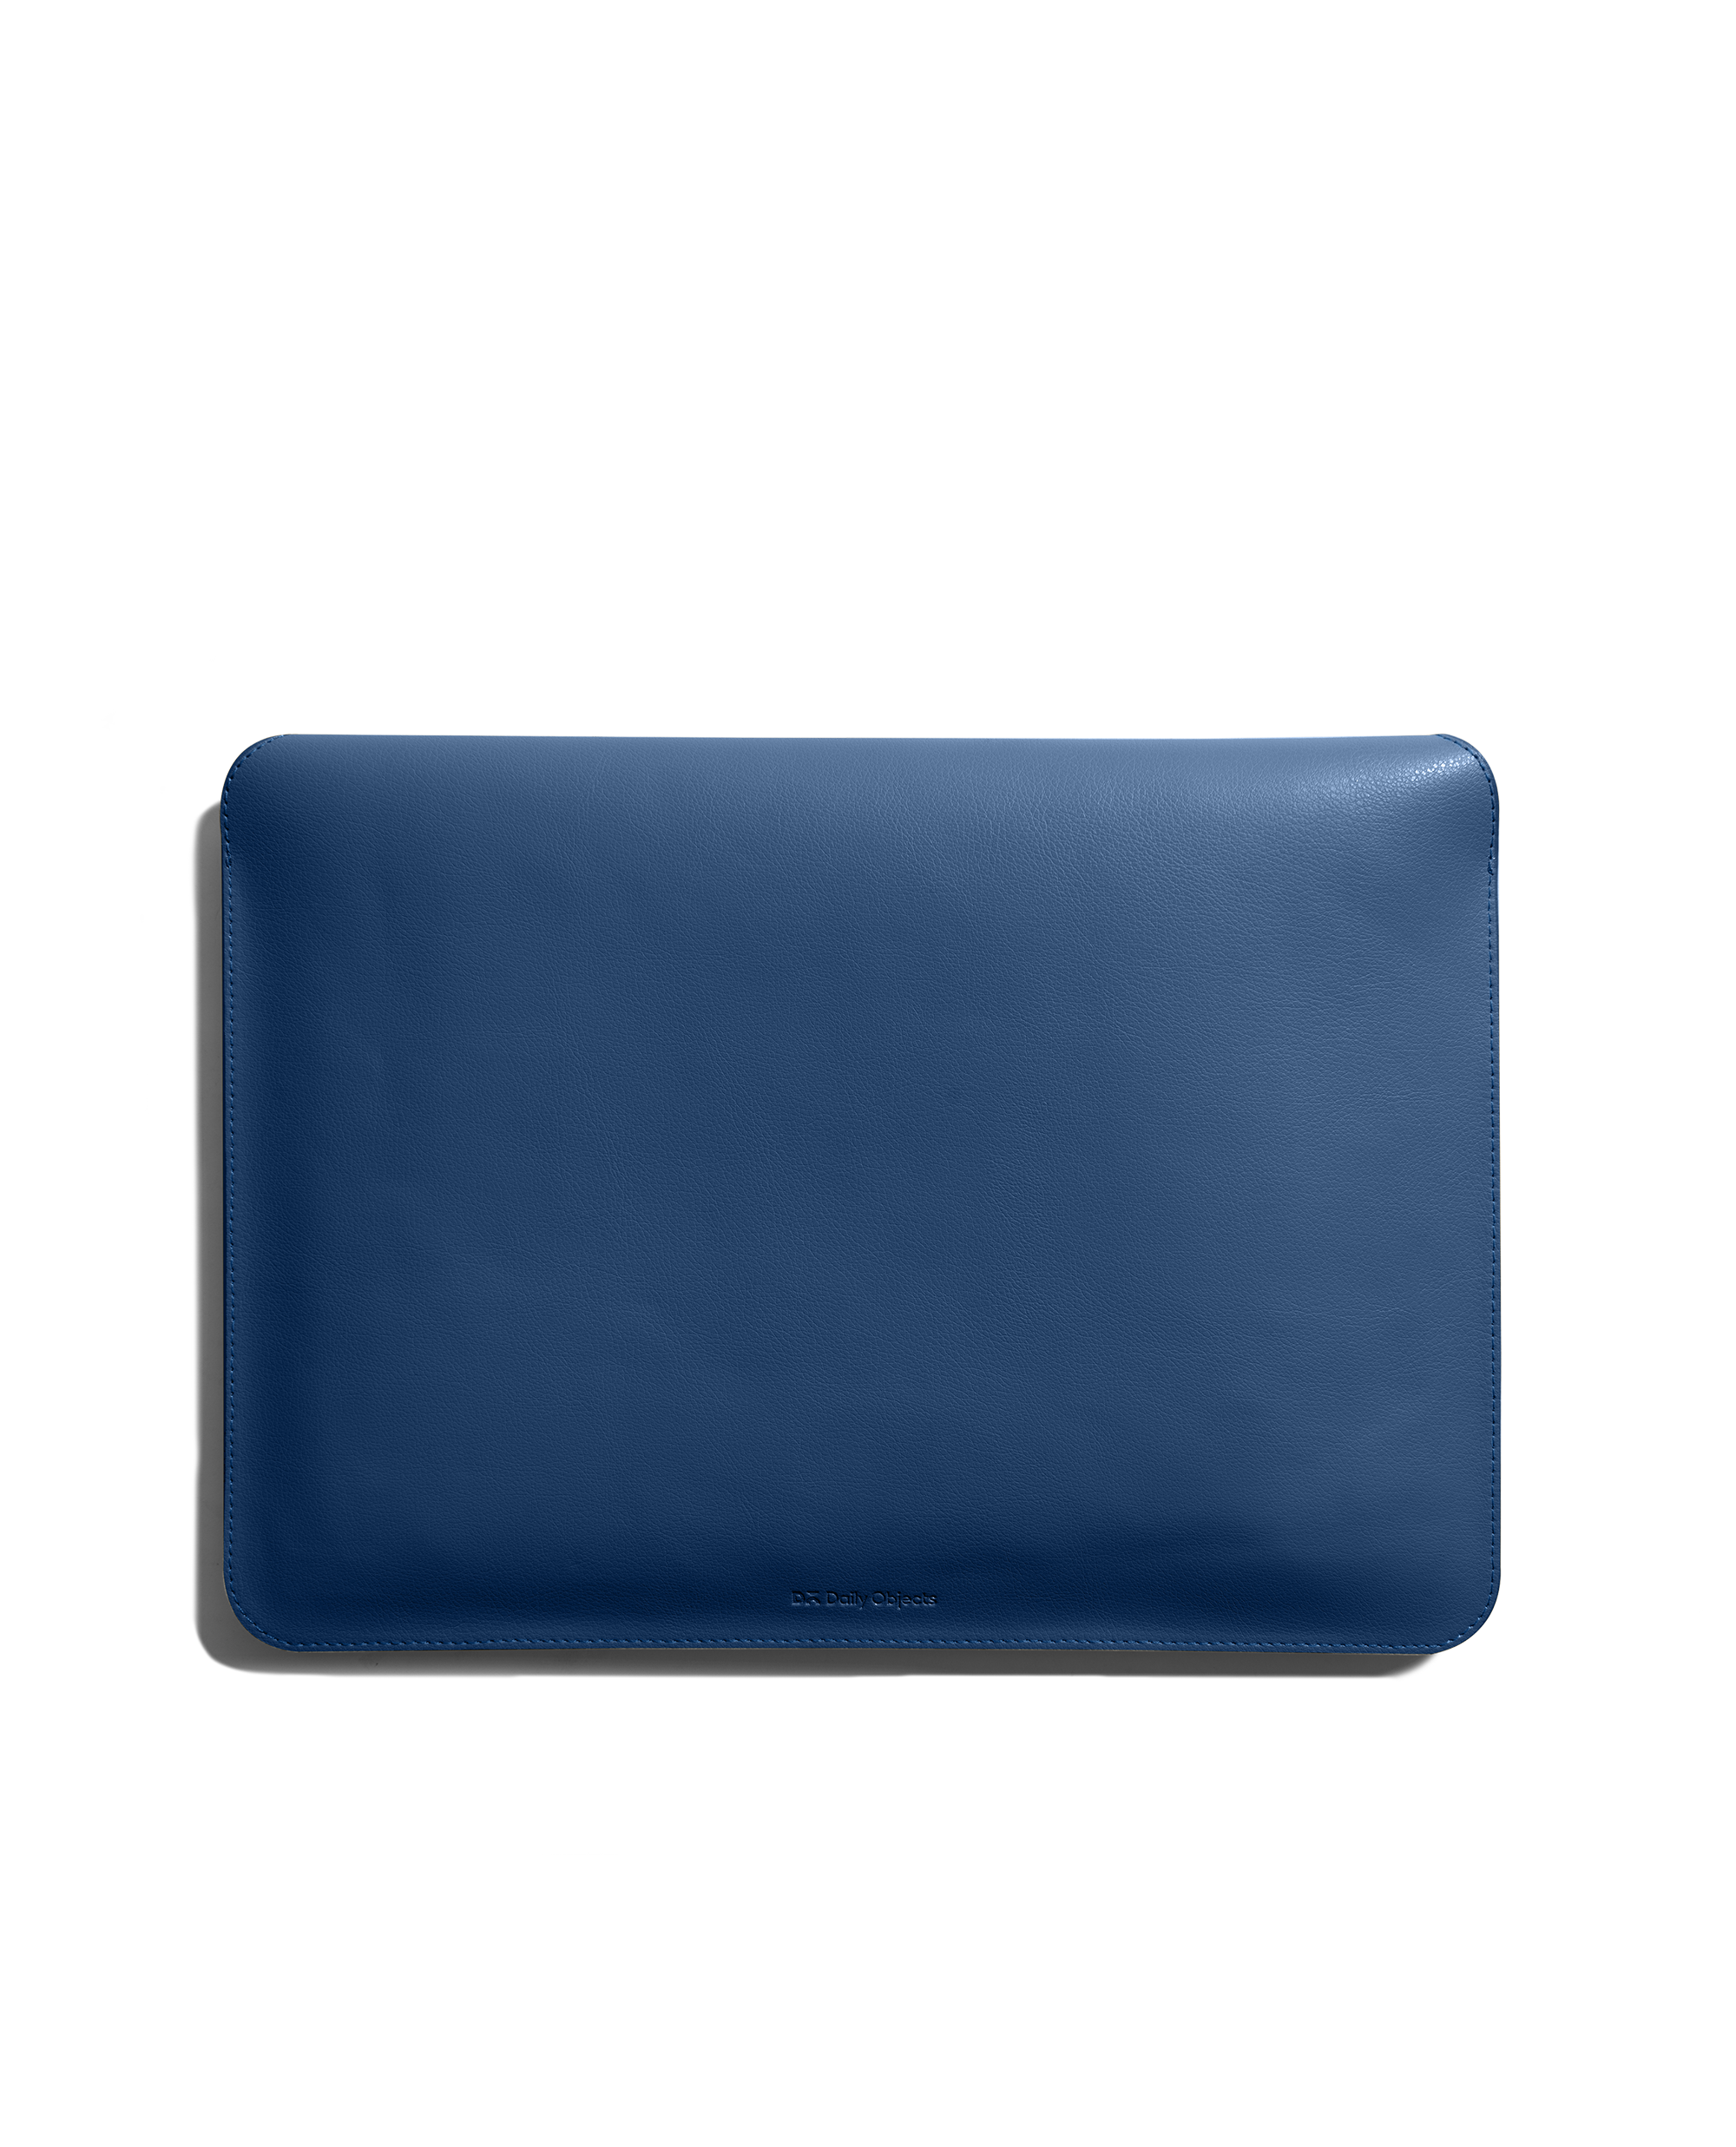 DailyObjects Space Blue-Mustard SnapOn Envelope Sleeve For Macbook Pro  35.56cm (14 inch) Buy At DailyObjects